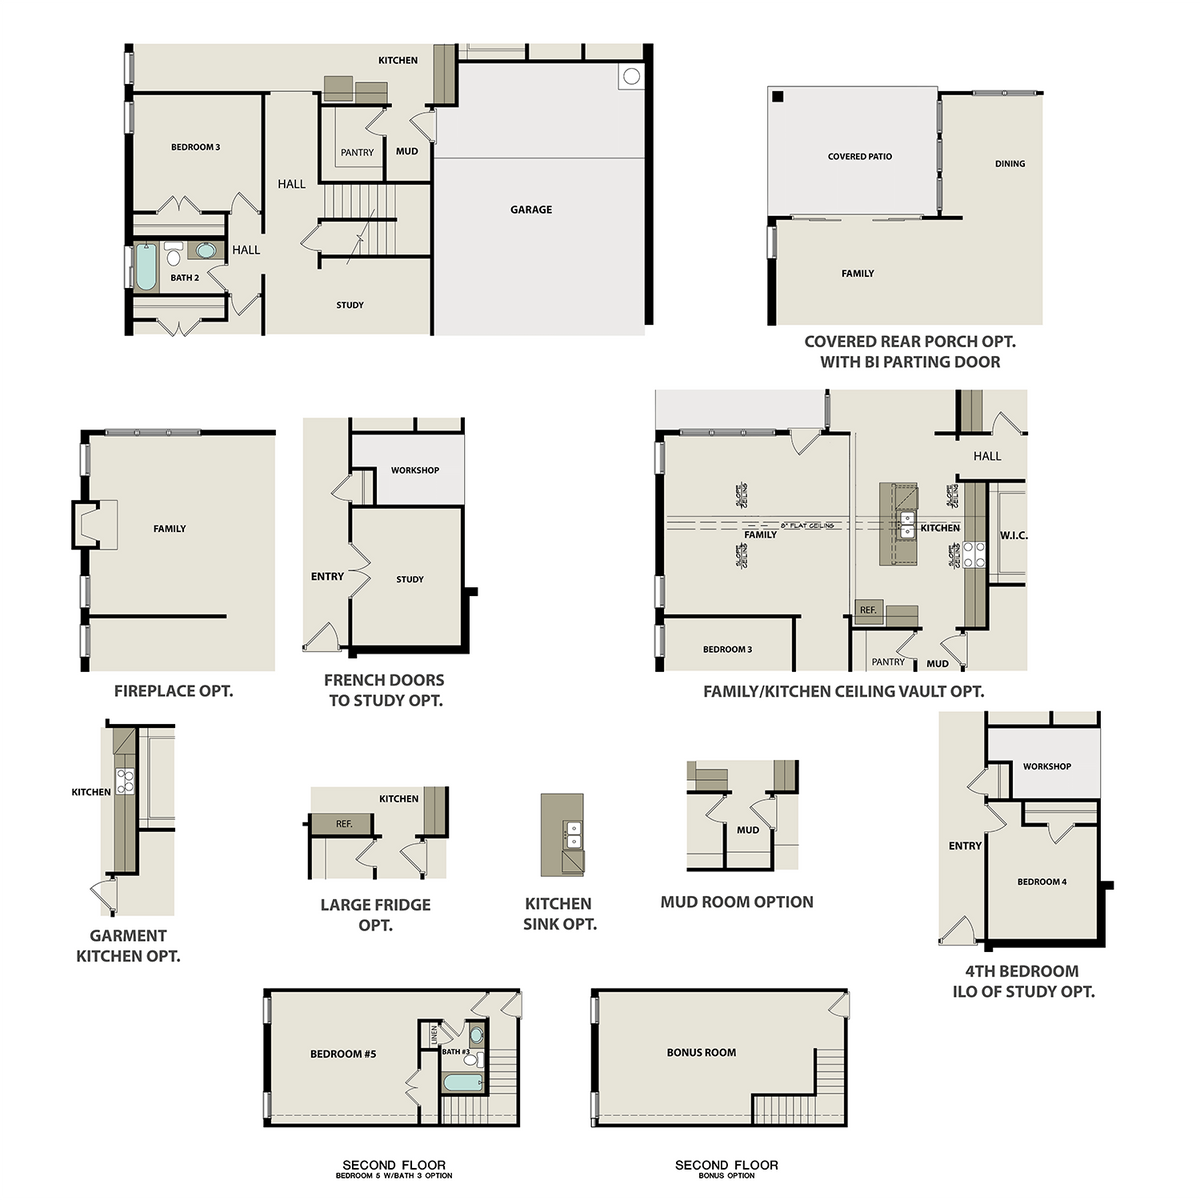 3 - The Ansley with Bonus buildable floor plan layout in Davidson Homes' Carellton community.